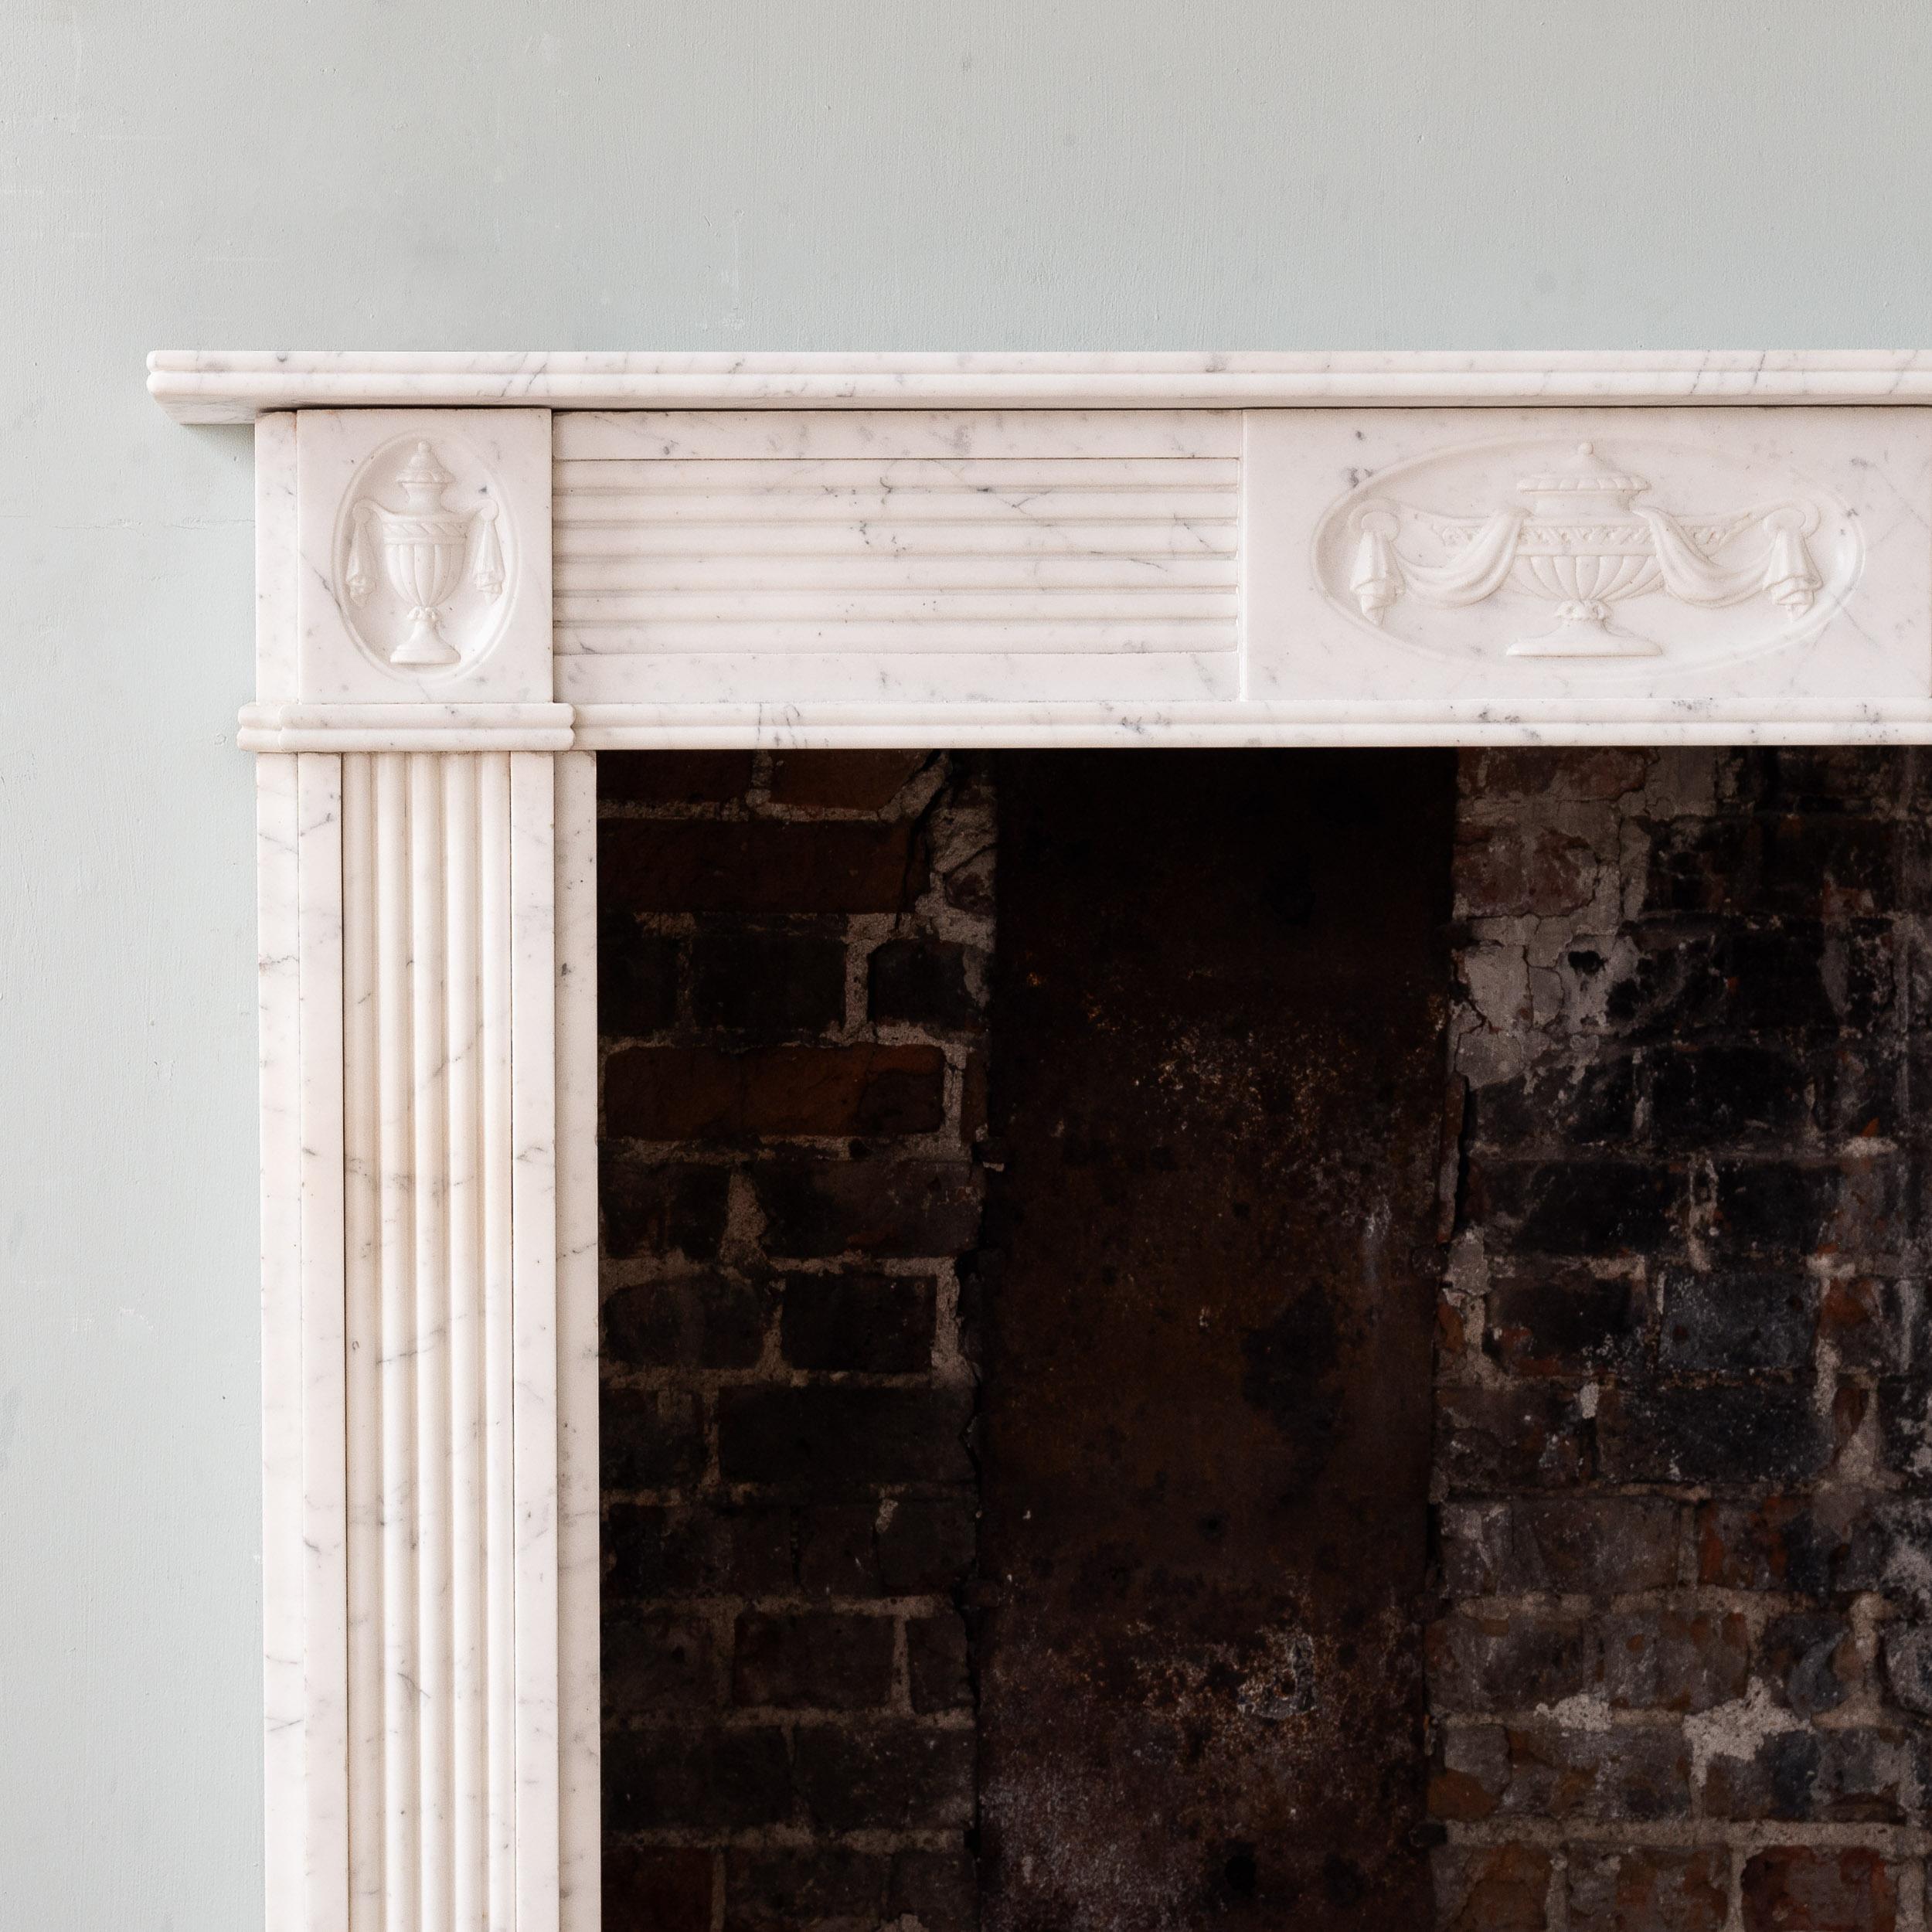 An ‘Old English’ Regency style fireplace, 1920s, with elegant reeded mouldings throughout, the frieze centred by relief carved tablet depicting a tazza draped in fabric.

Dimensions:	102.5cm (40¼